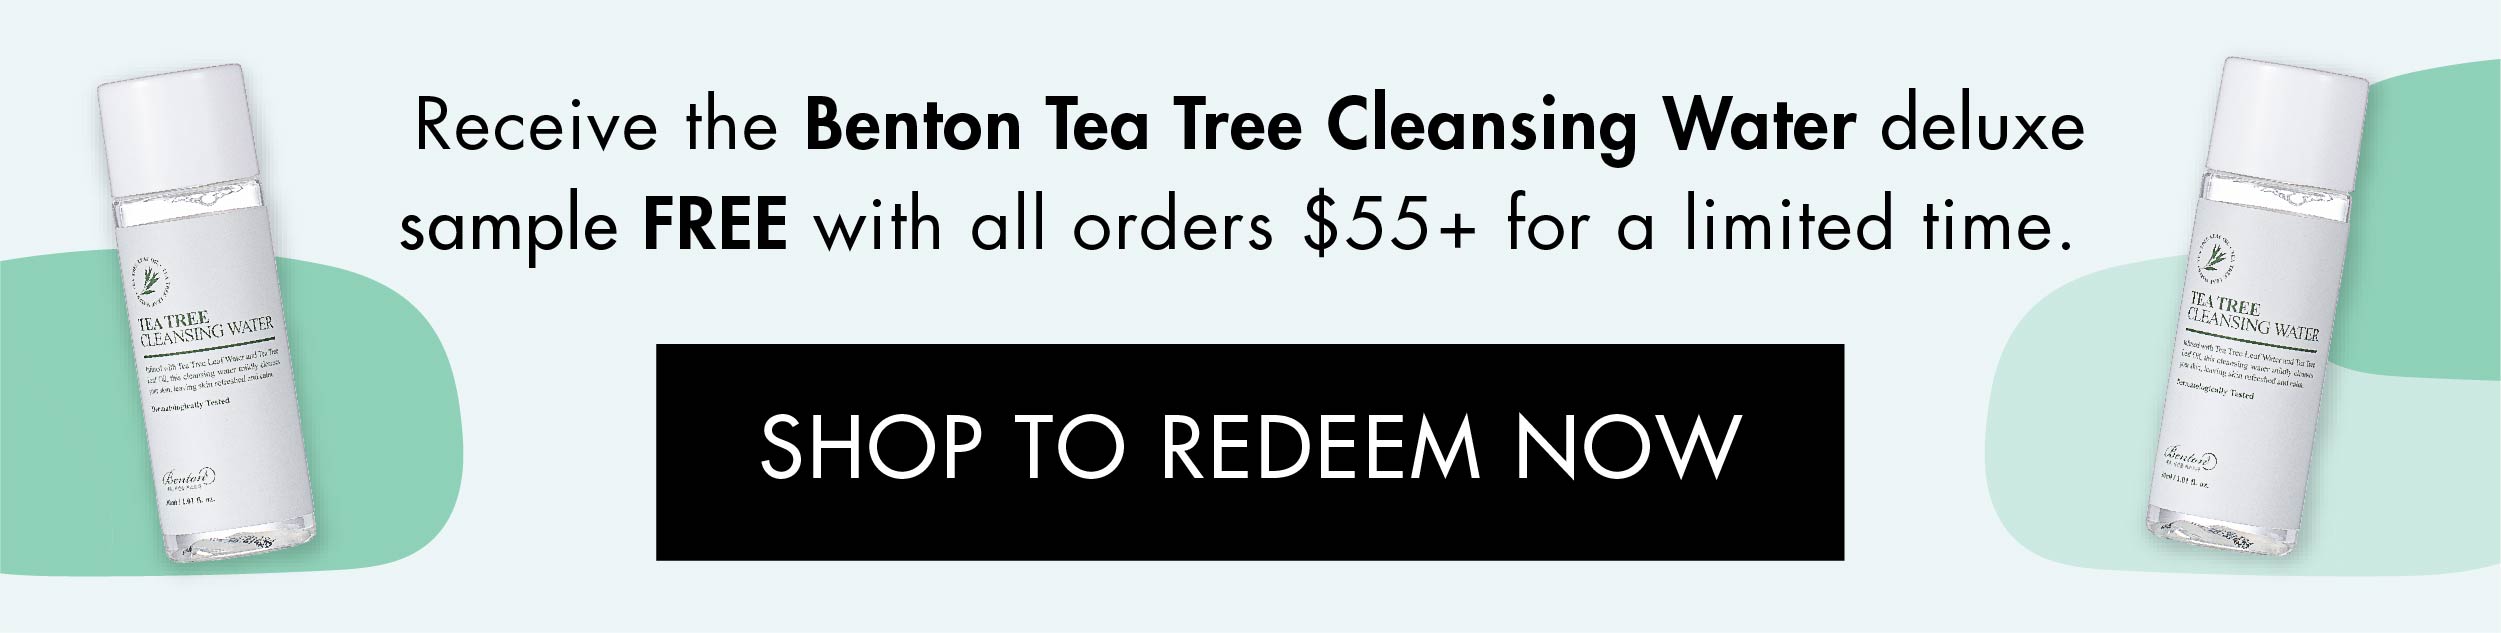 Free gift with all orders $55+ for a limited time.